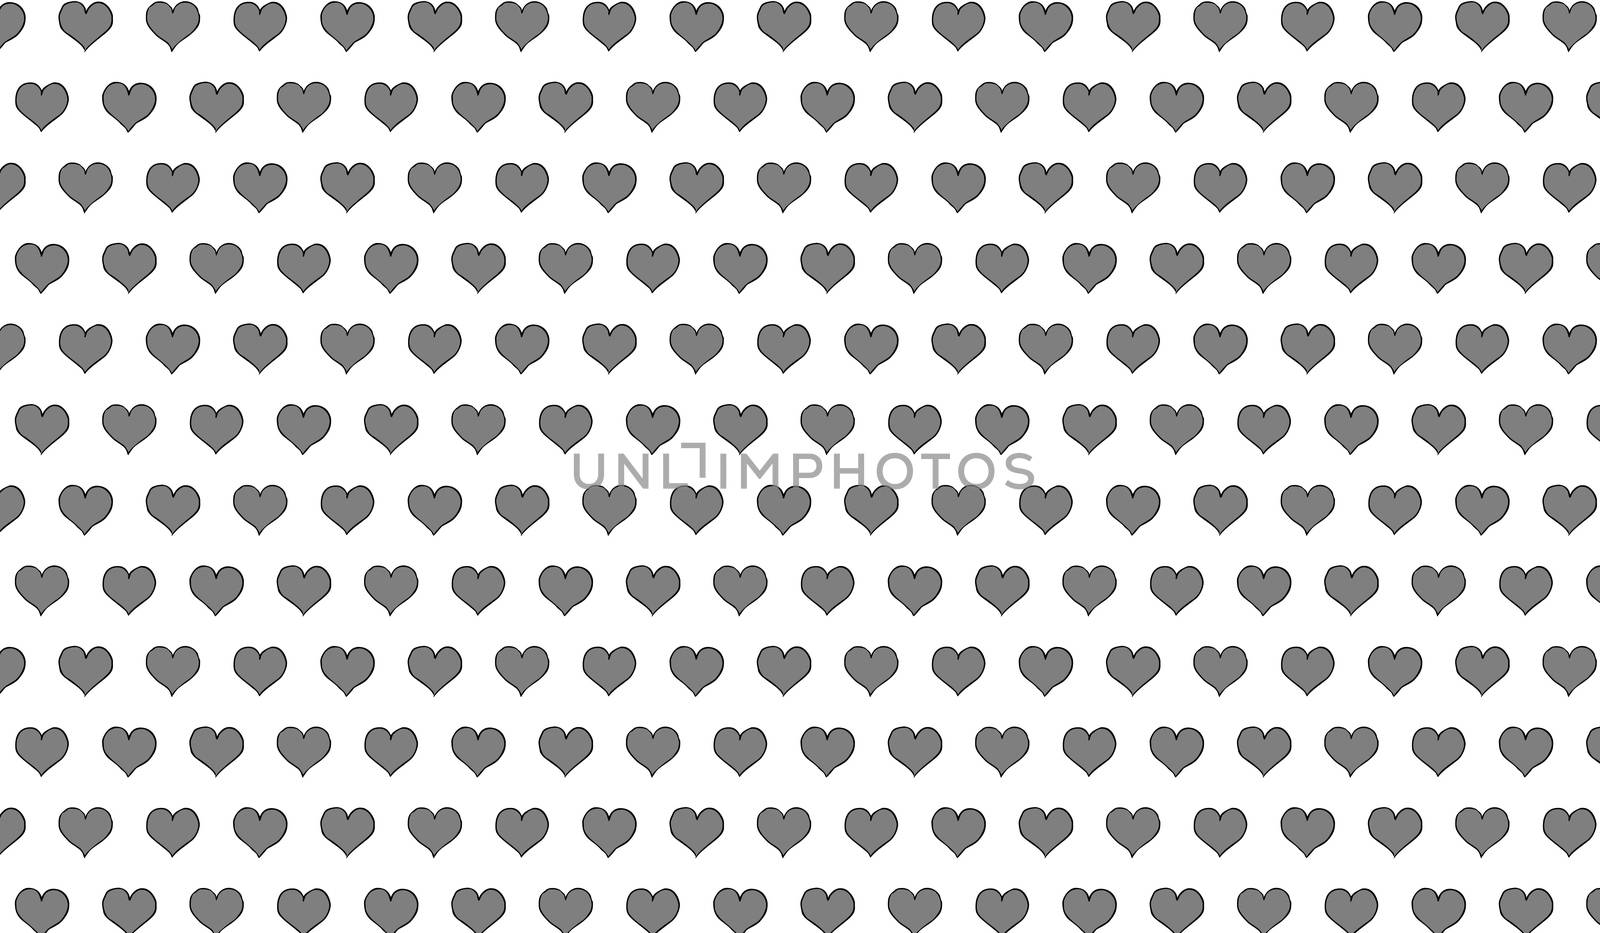 2d grey pattern of cartoon hearts on isolated background.